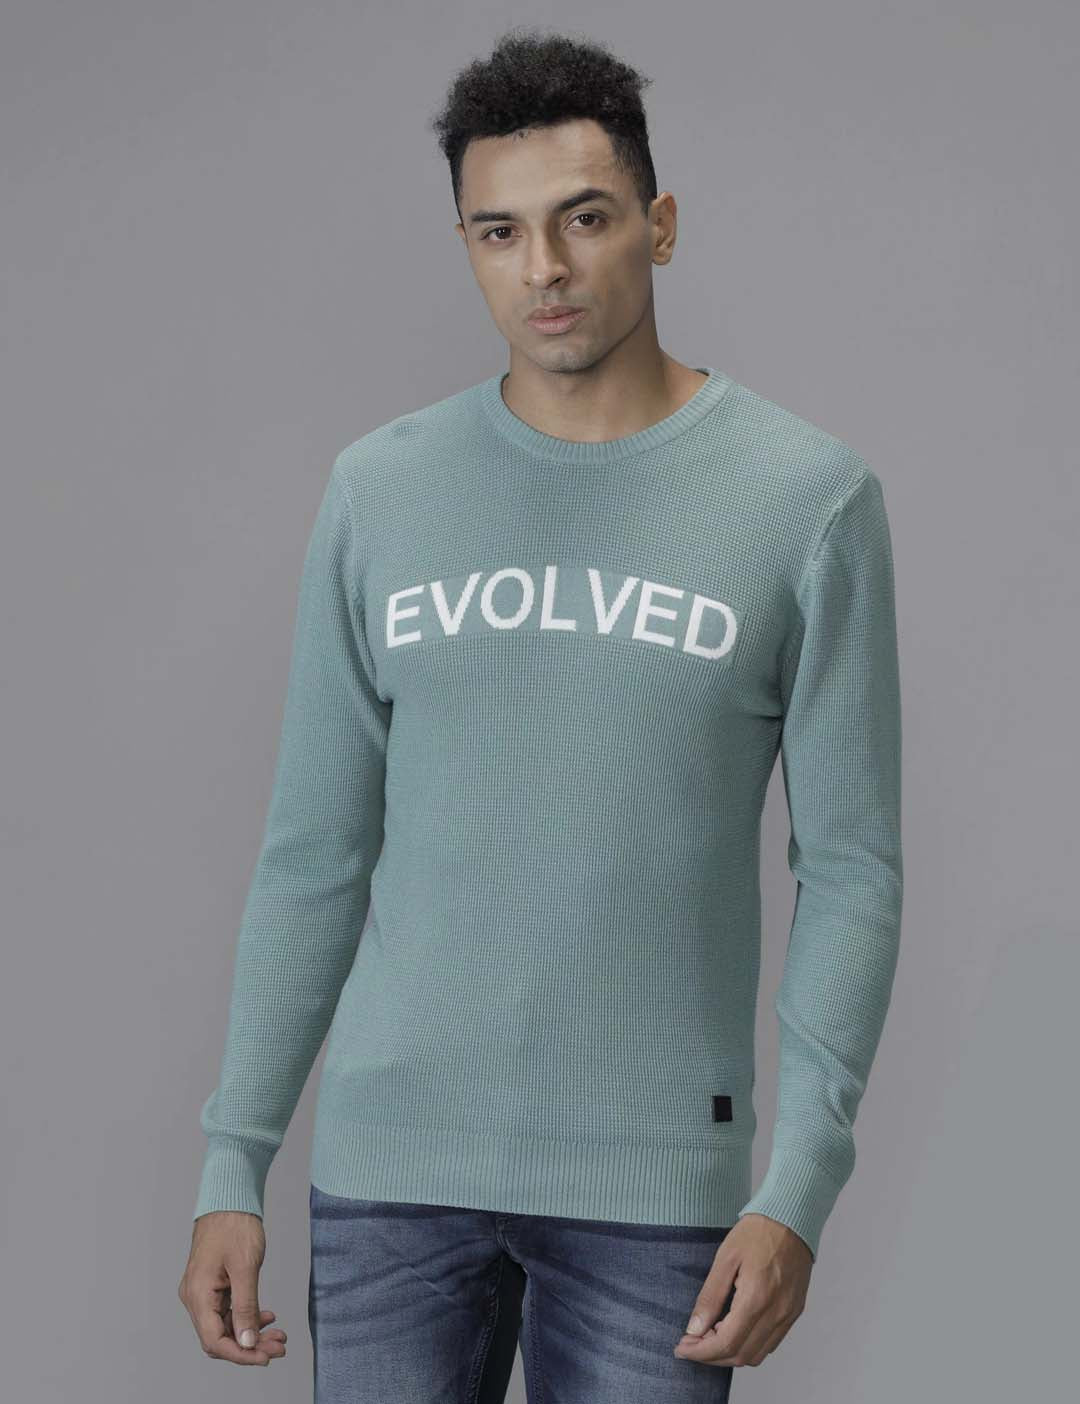 Evolved Typographic Knitted Sweater